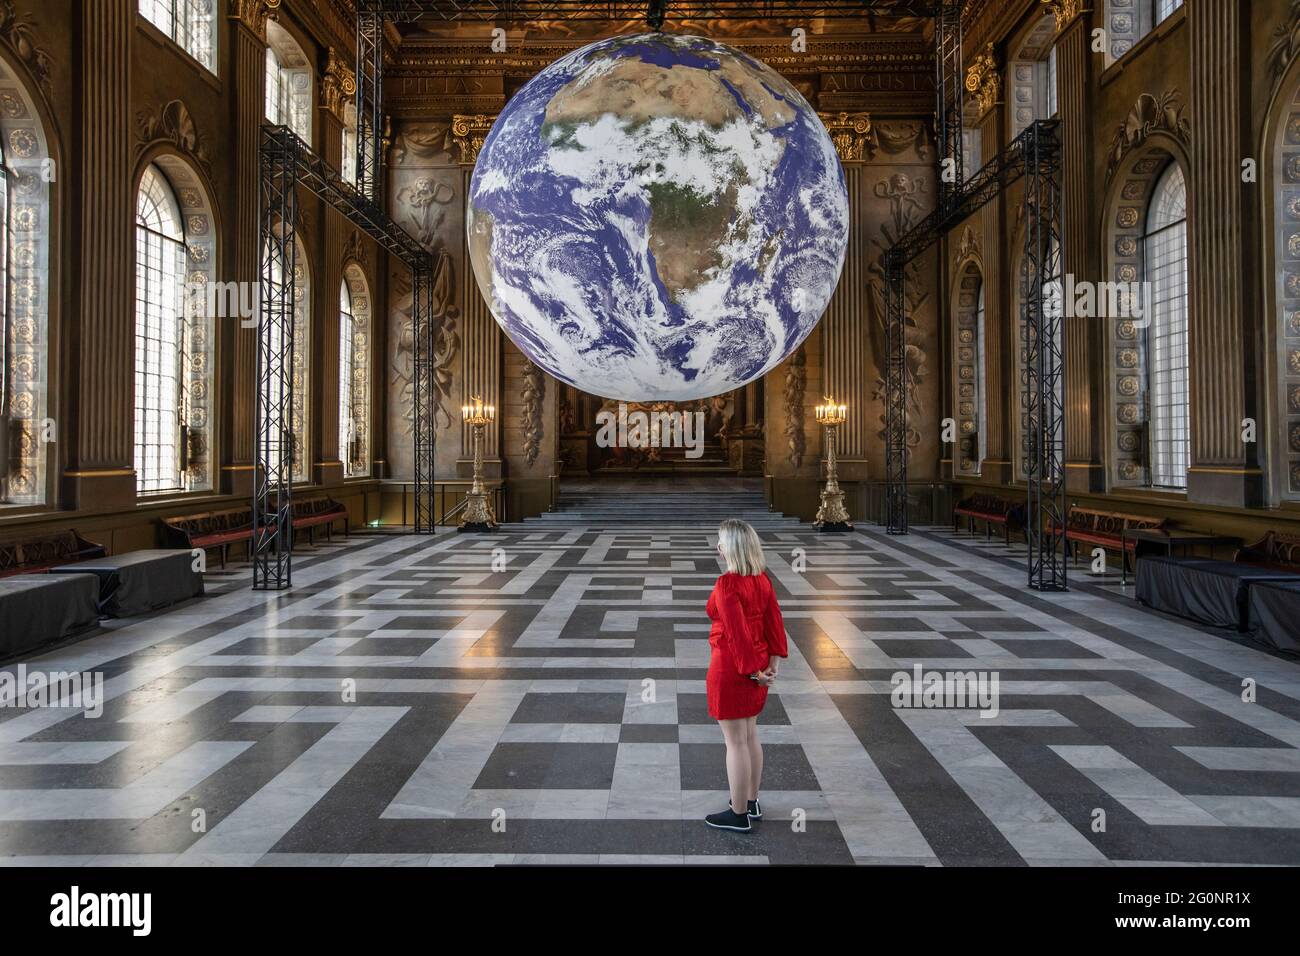 Art installation Gaia in the Painted Hall at the Old Royal Naval College. This monumental sculpture of earth is made using NASA imagery, London, UK Stock Photo